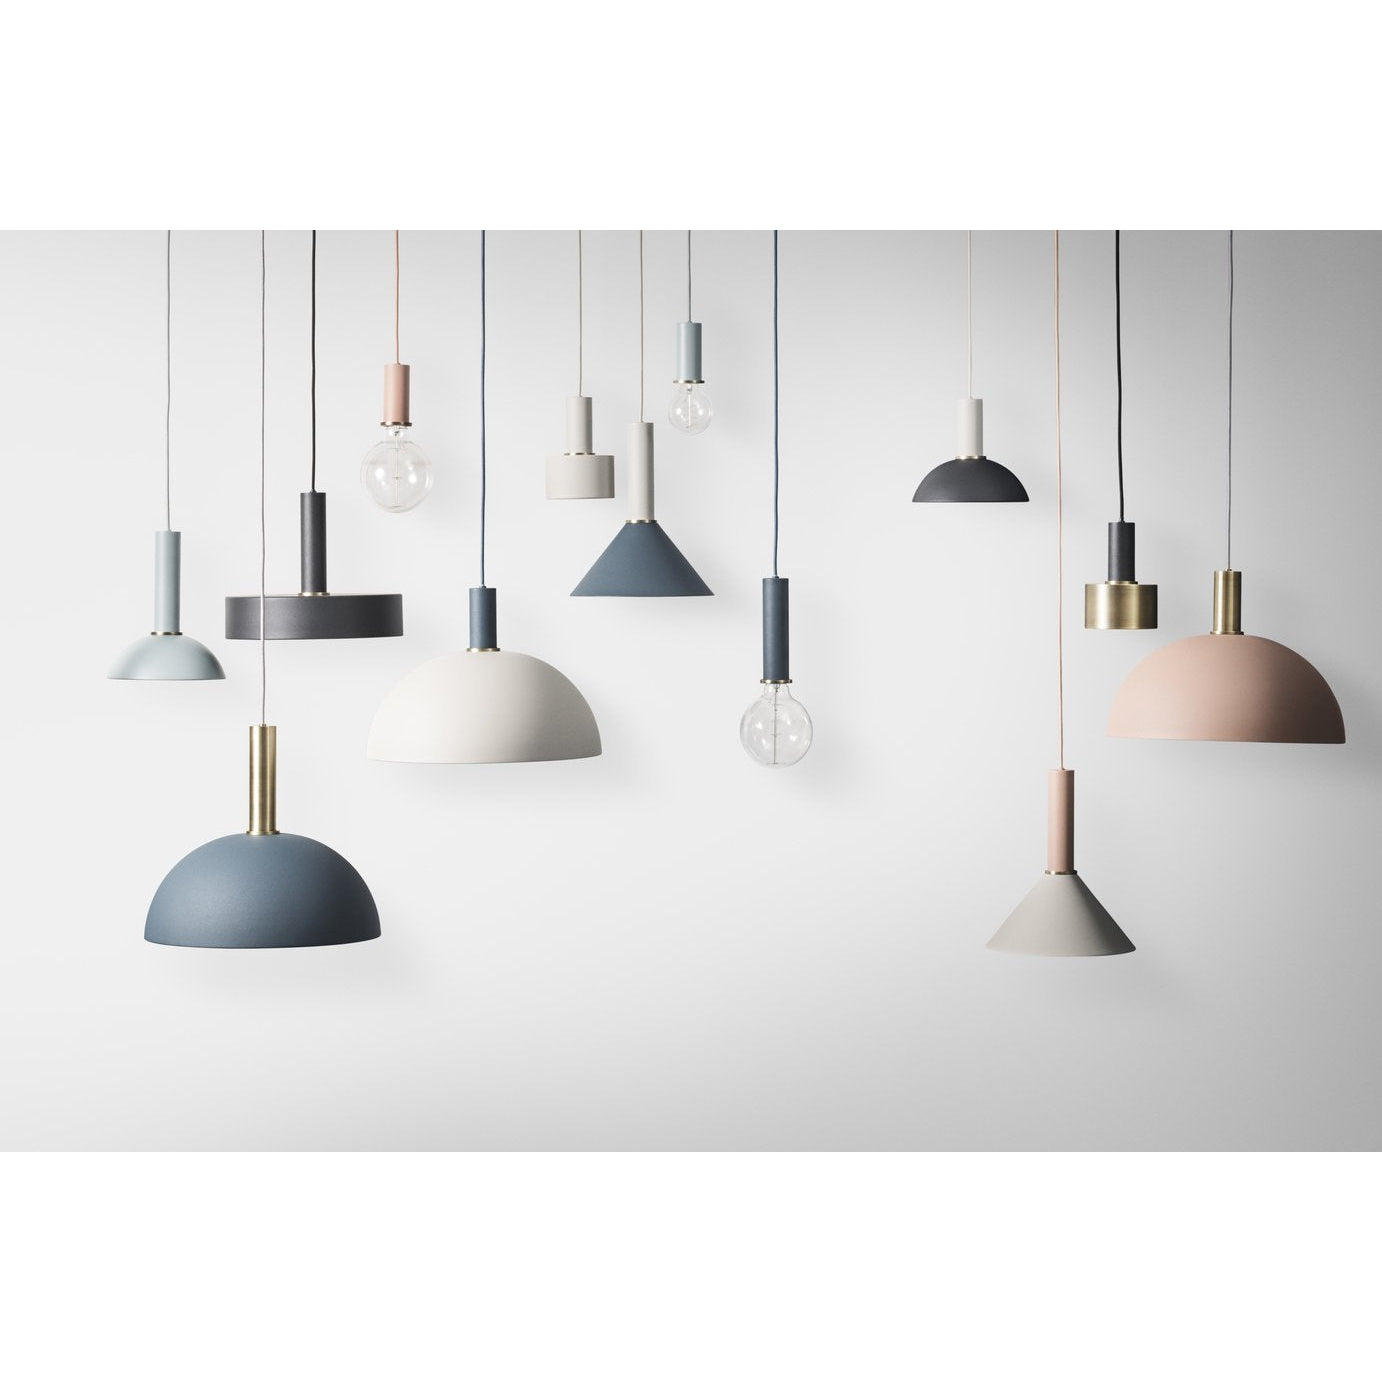 Ferm Living Record Lampshade，深绿色